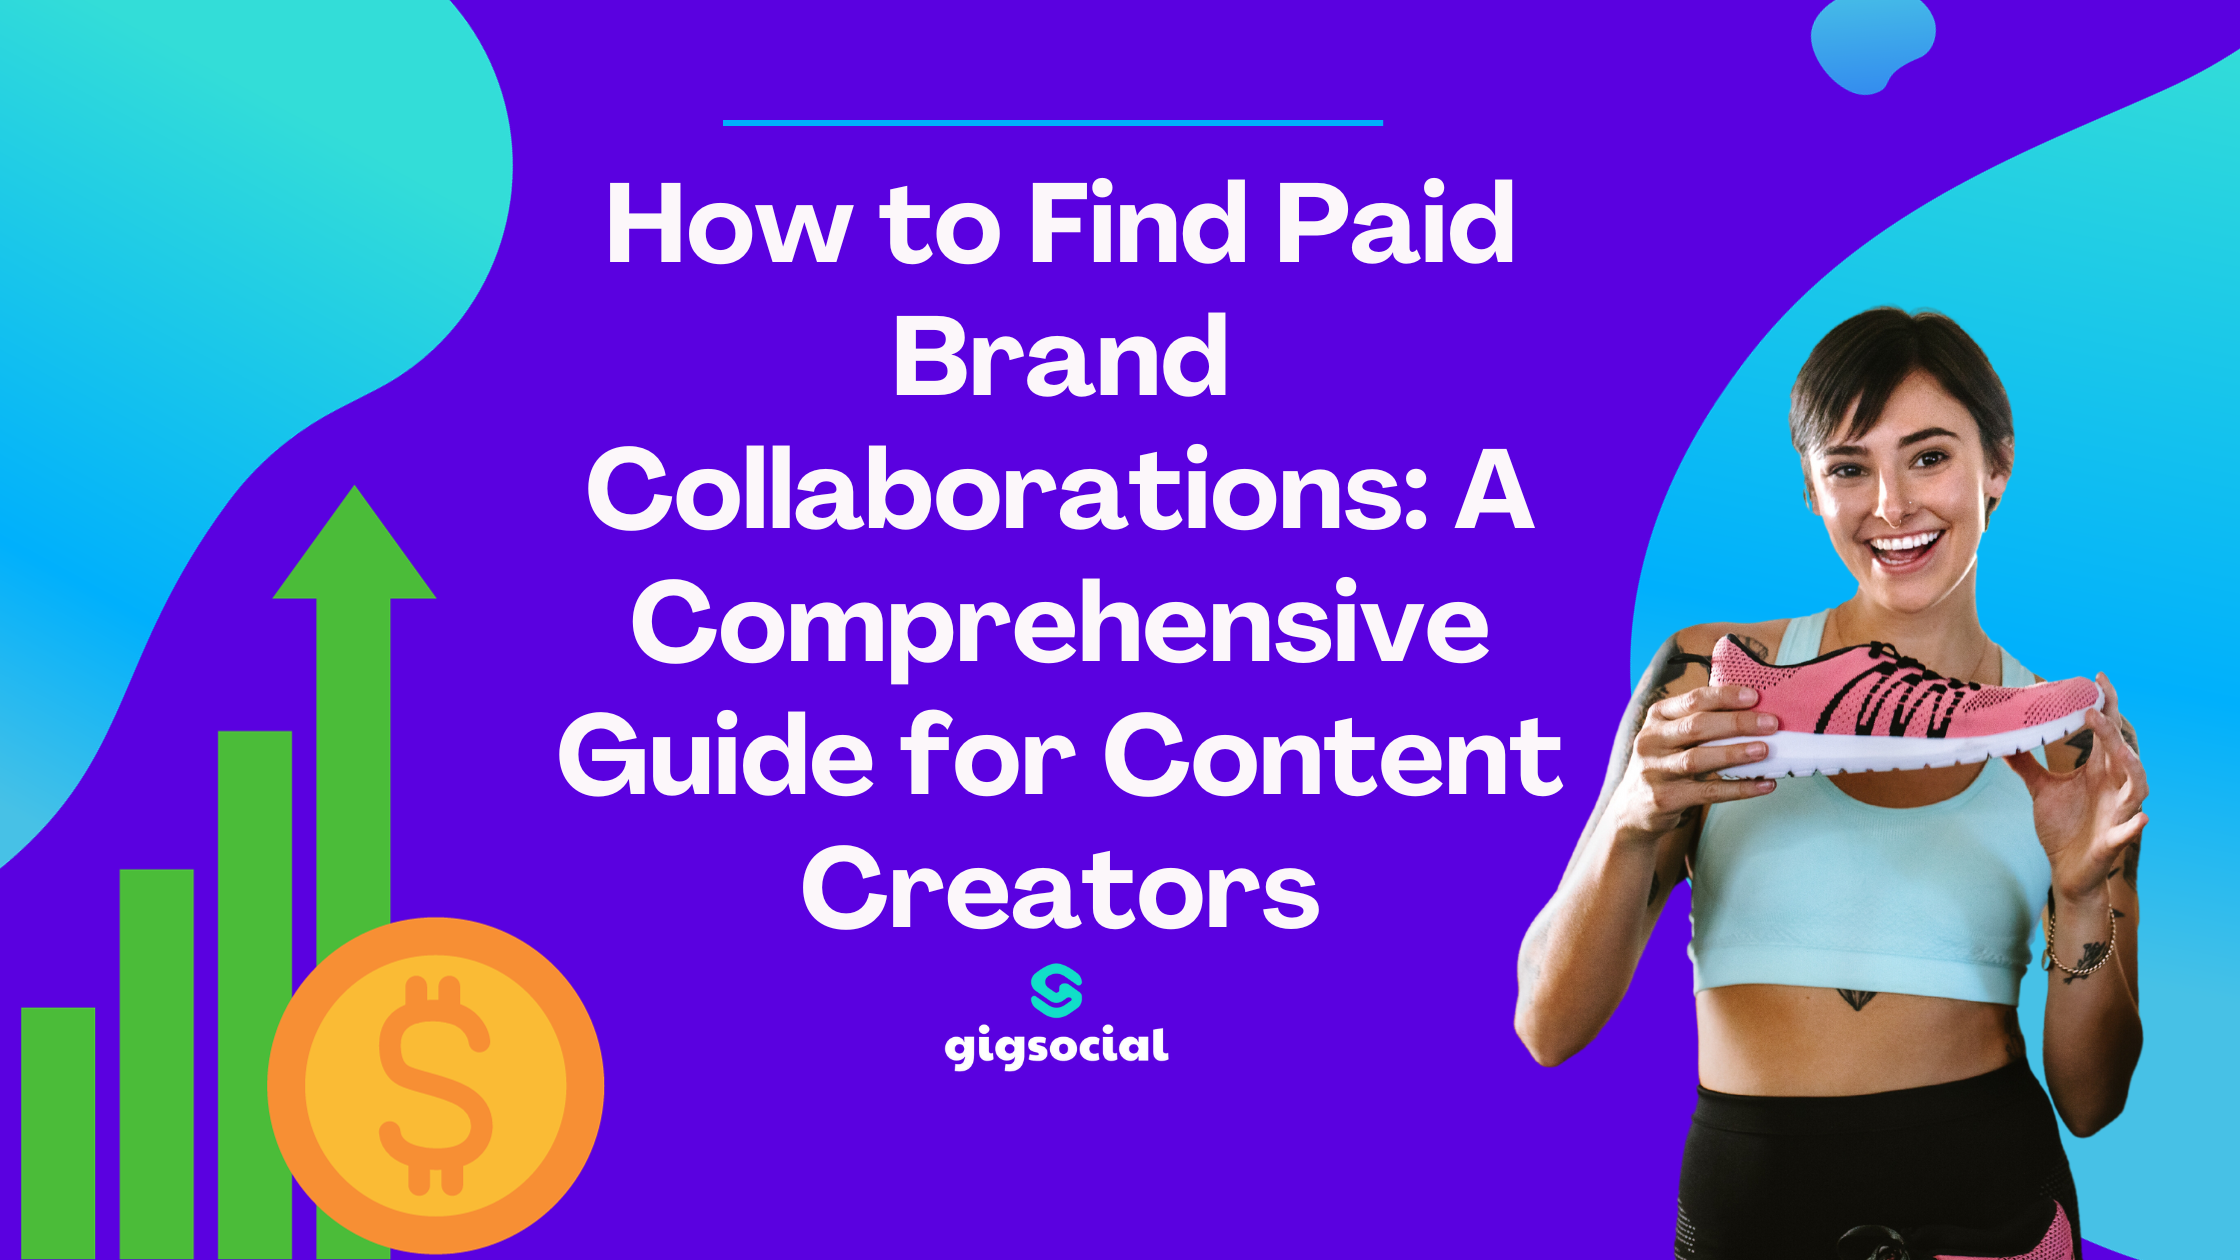 How to Find Paid Brand Collaborations: A Comprehensive Guide for Content Creators